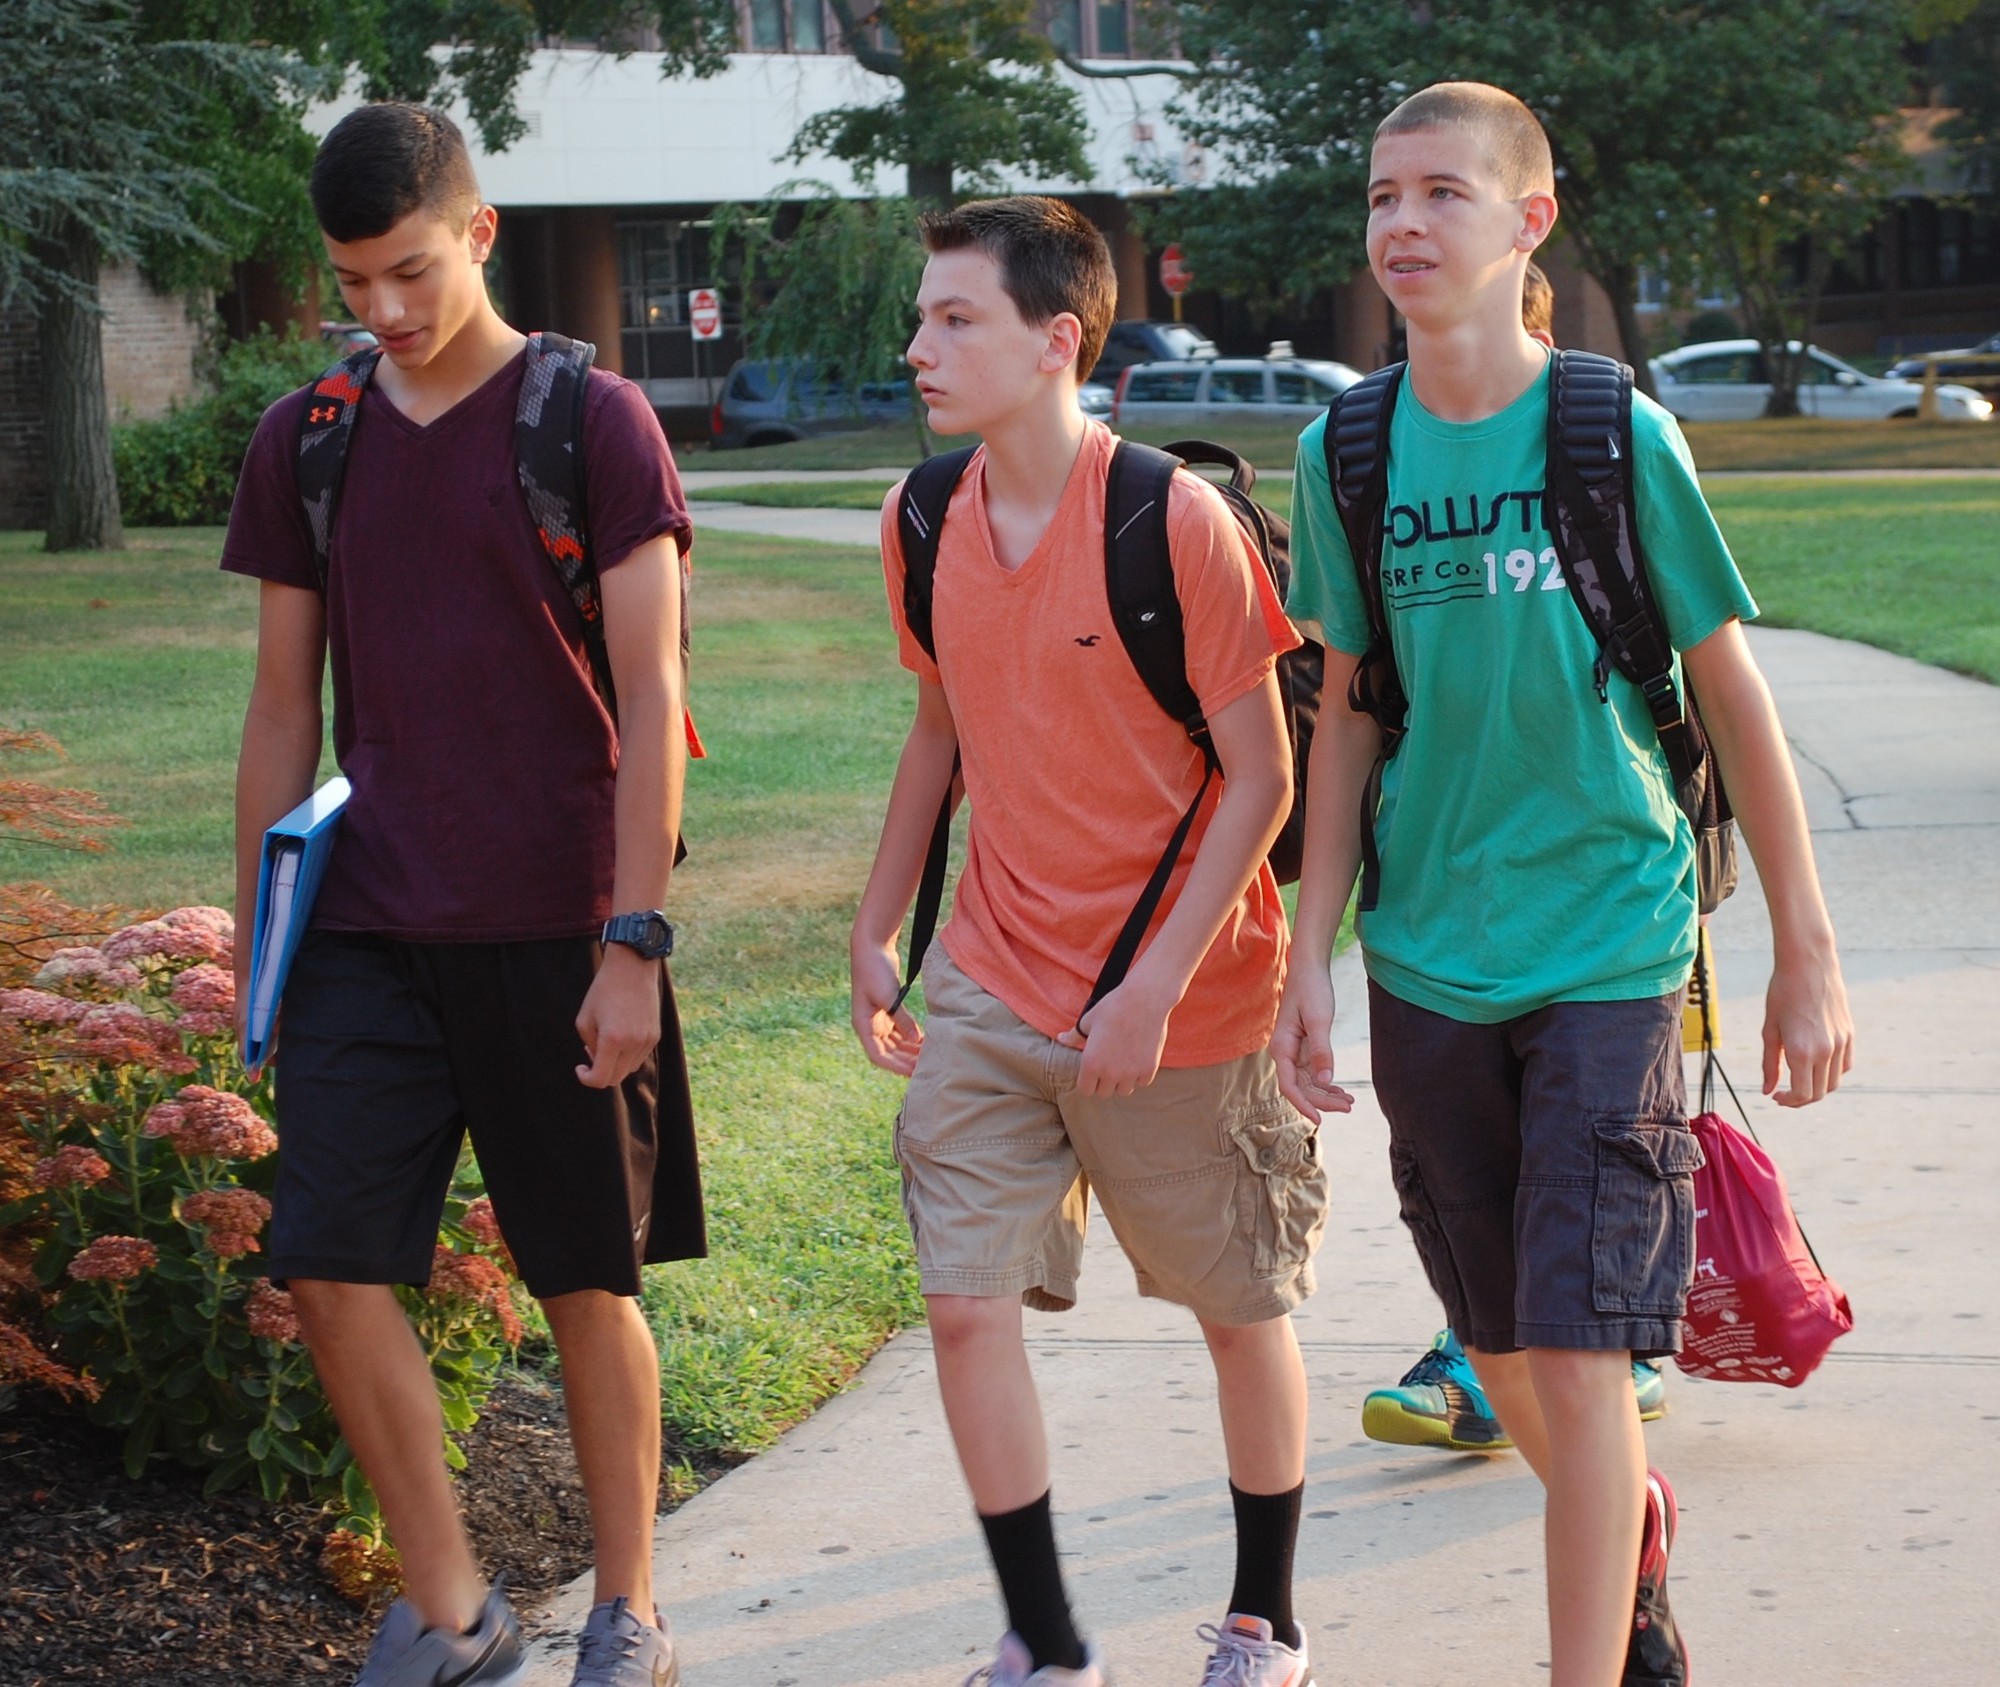 Students arrived at Wantagh High School for the first day of the new school year on Sept. 1.